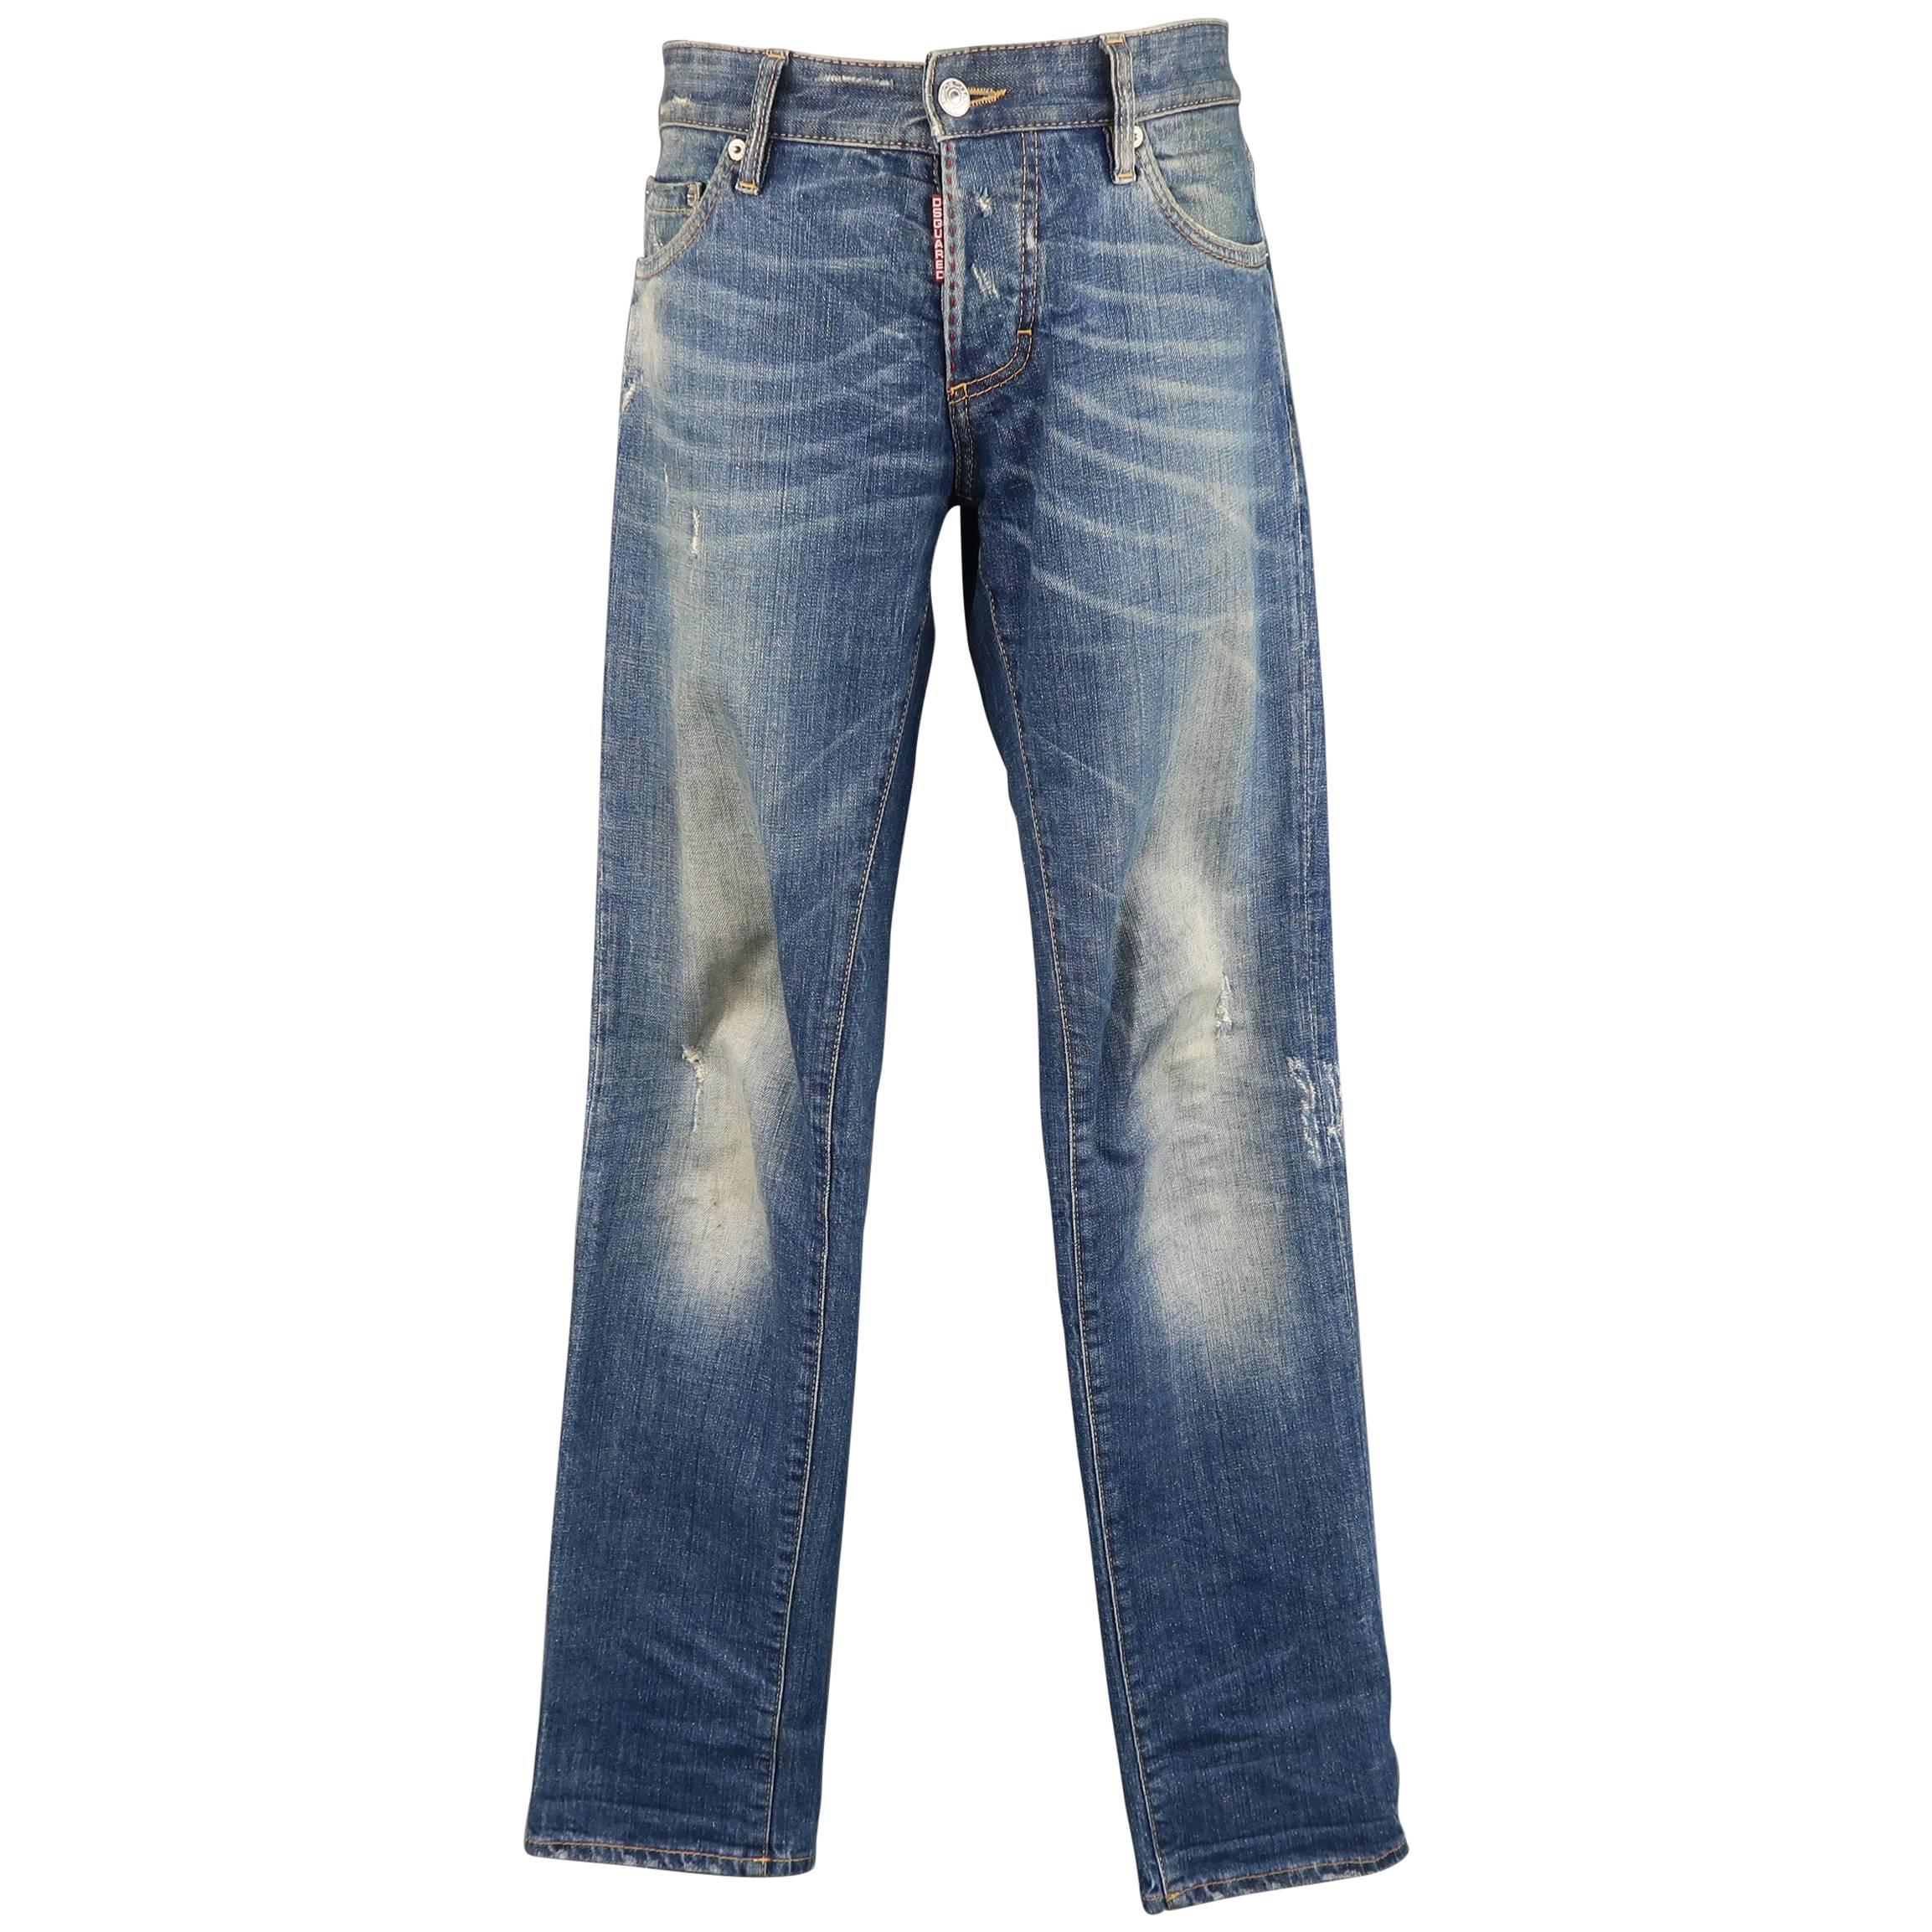 Dirty Jeans - For Sale on 1stDibs